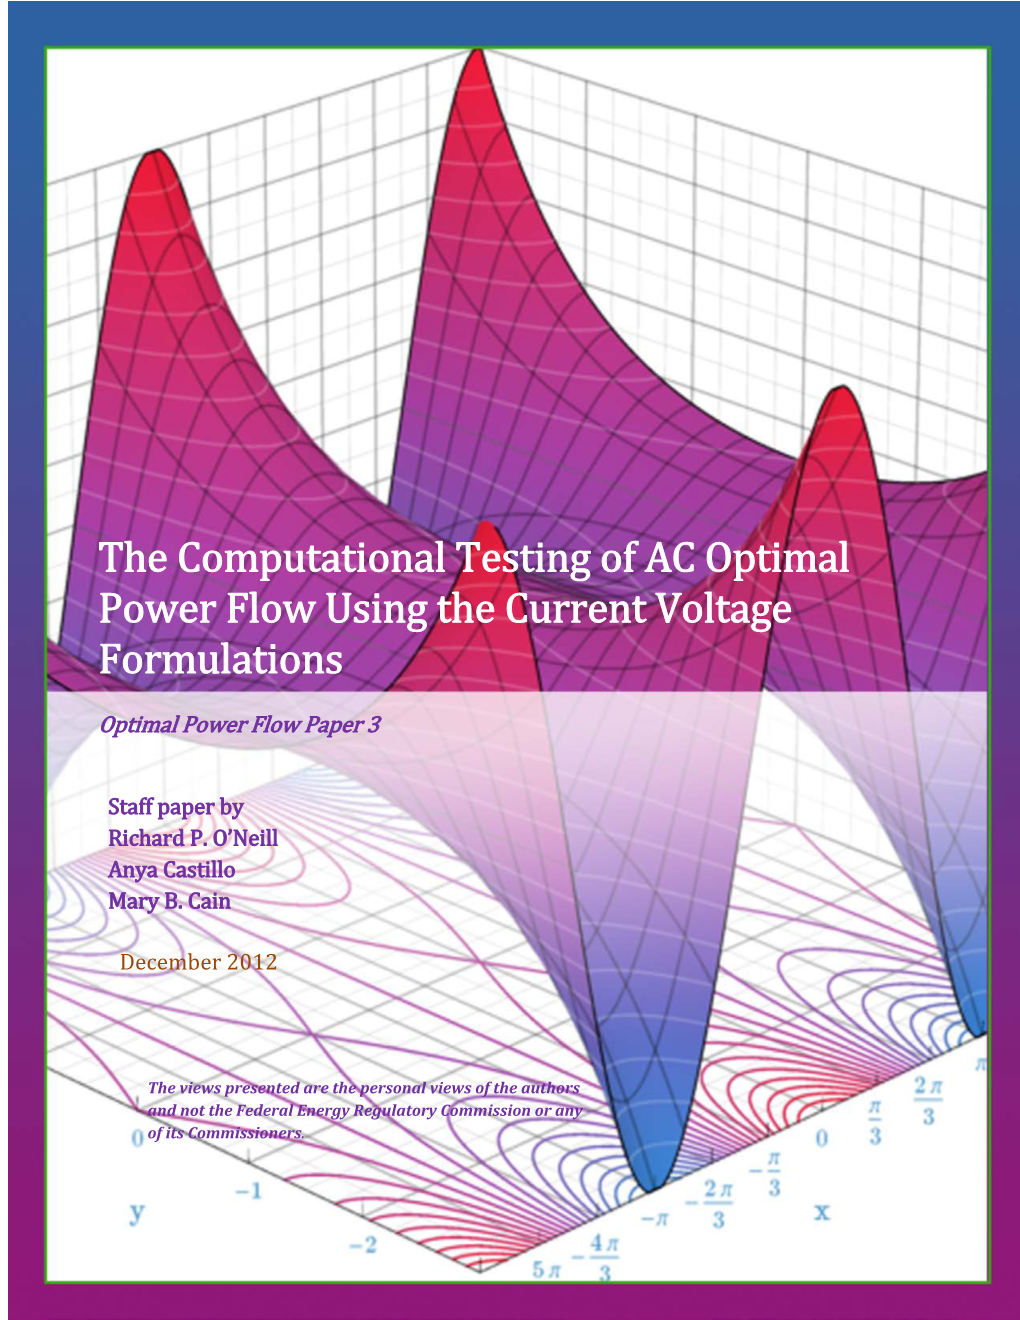 The Computational Testing of AC Optimal Power Flow Using the Current Voltage Formulations